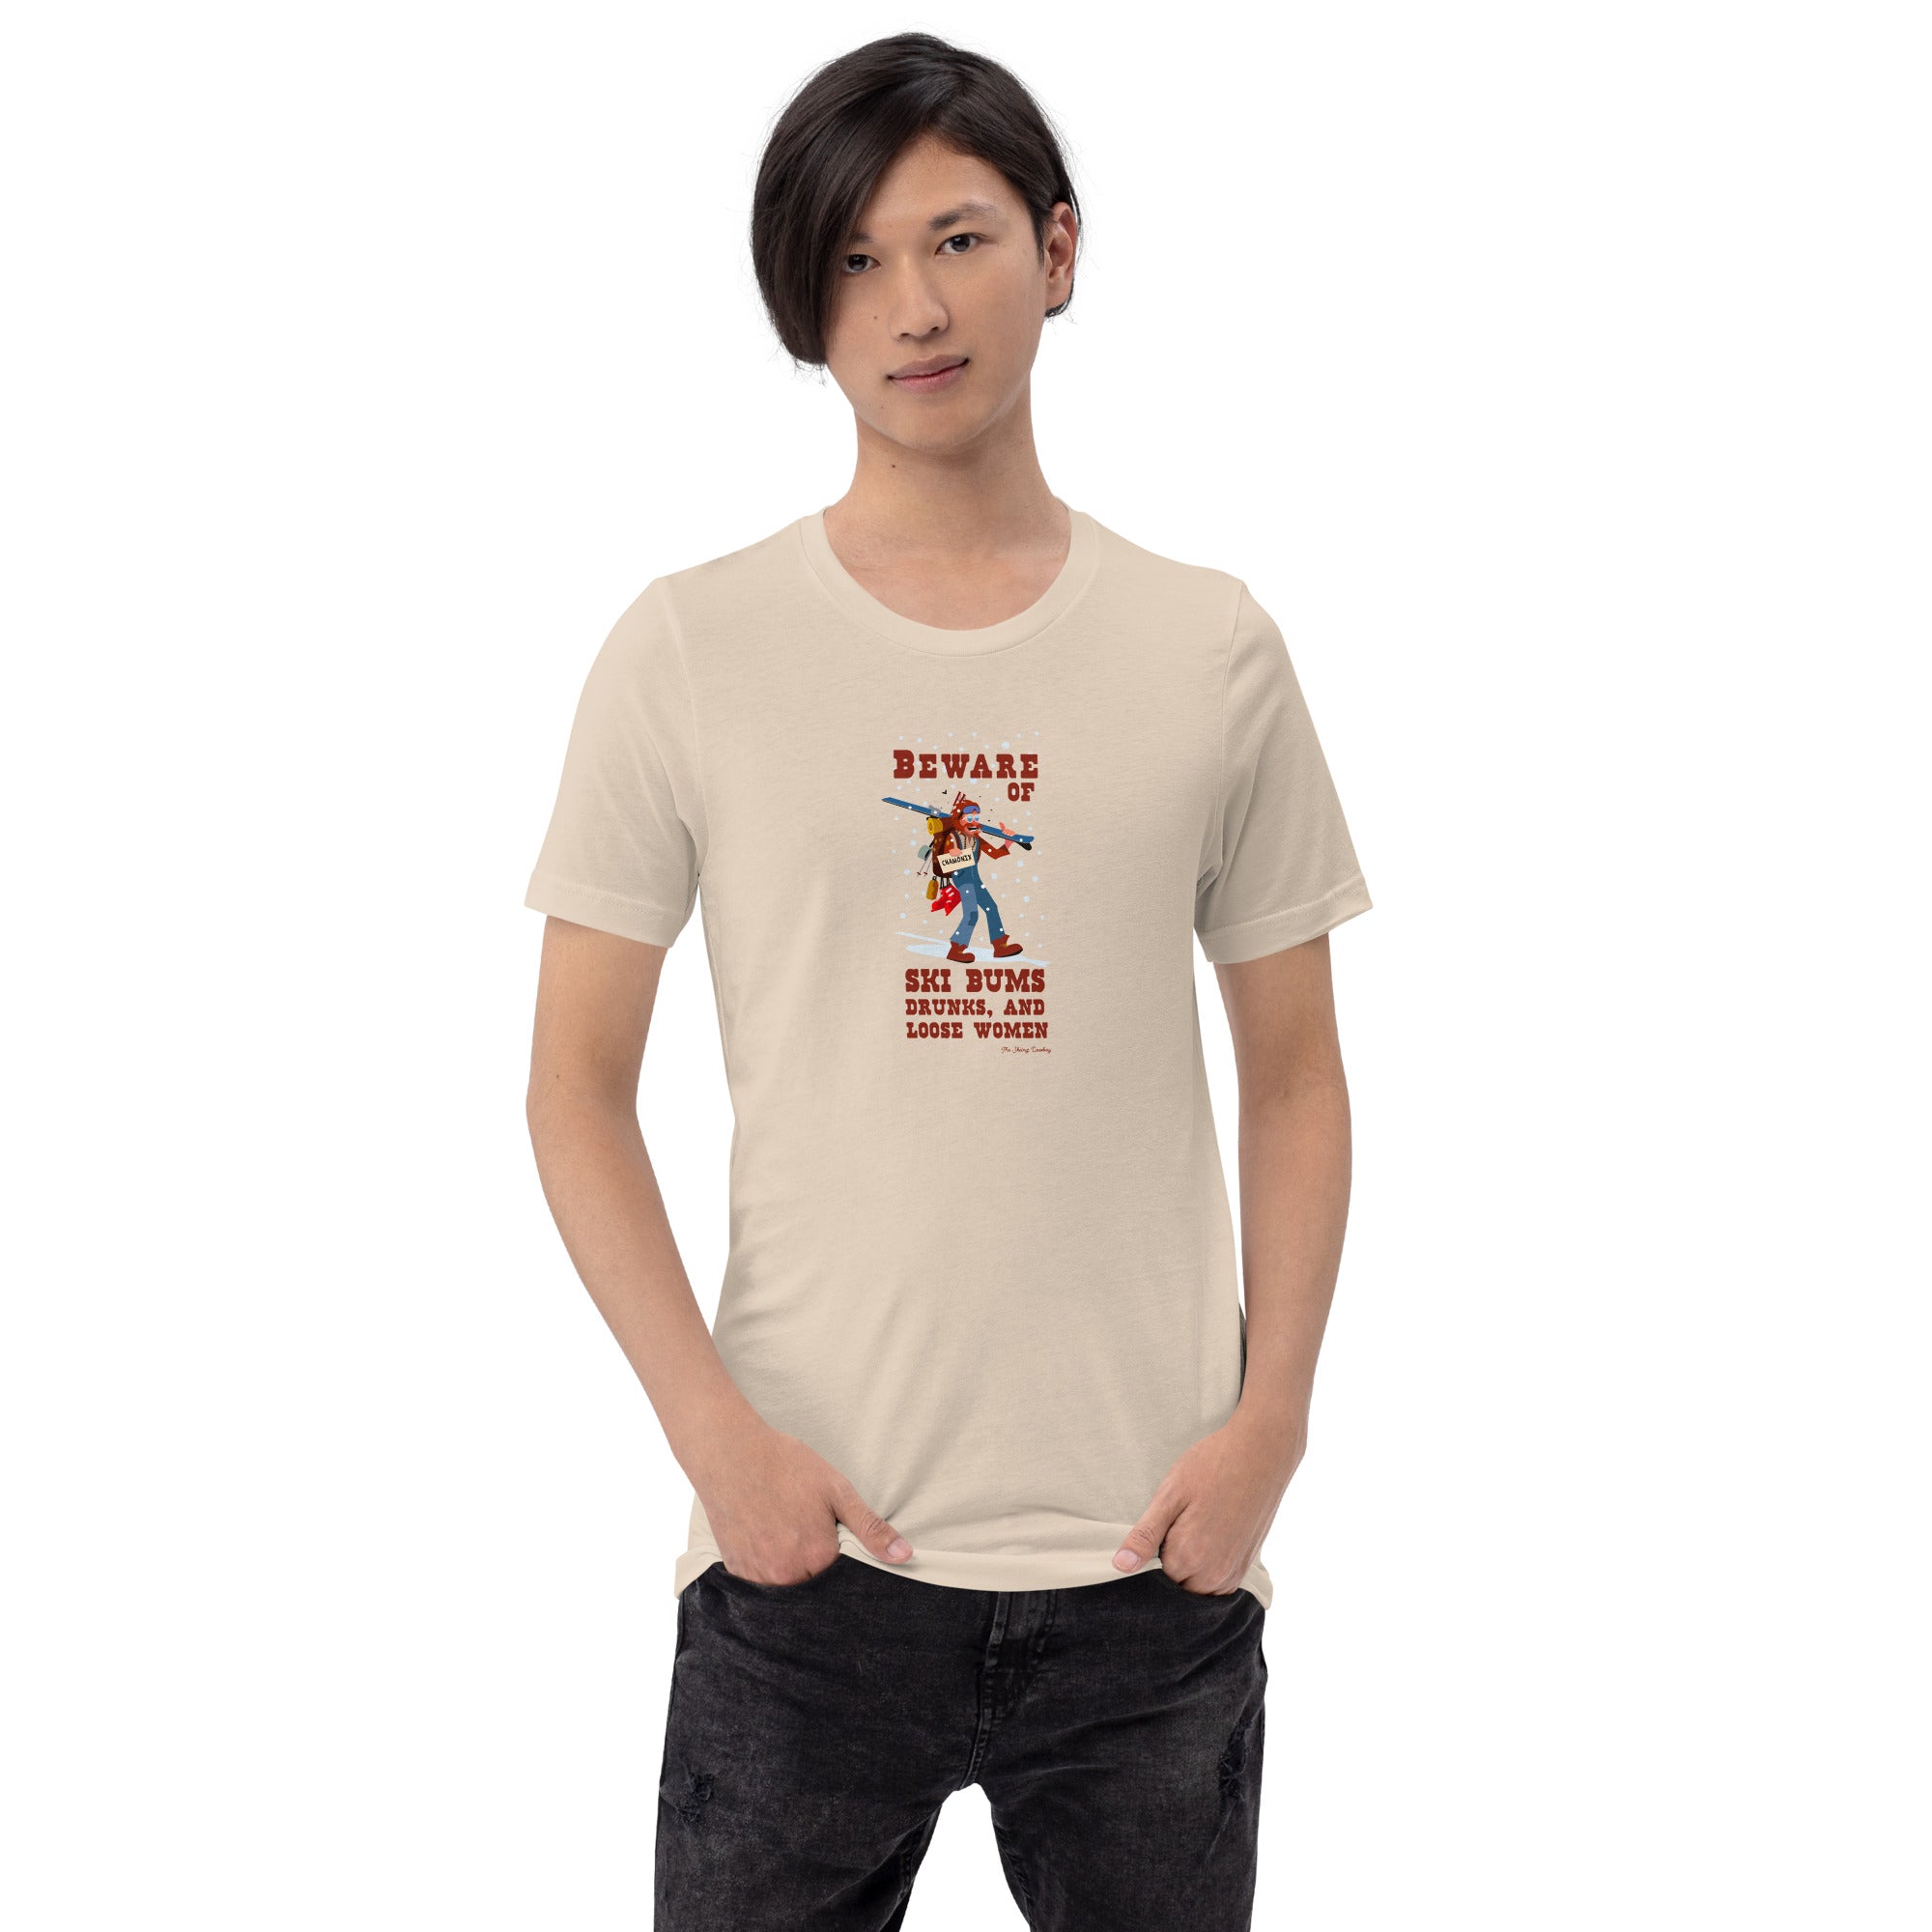 Unisex cotton t-shirt Beware of ski bums, drunks and loose women on light colors